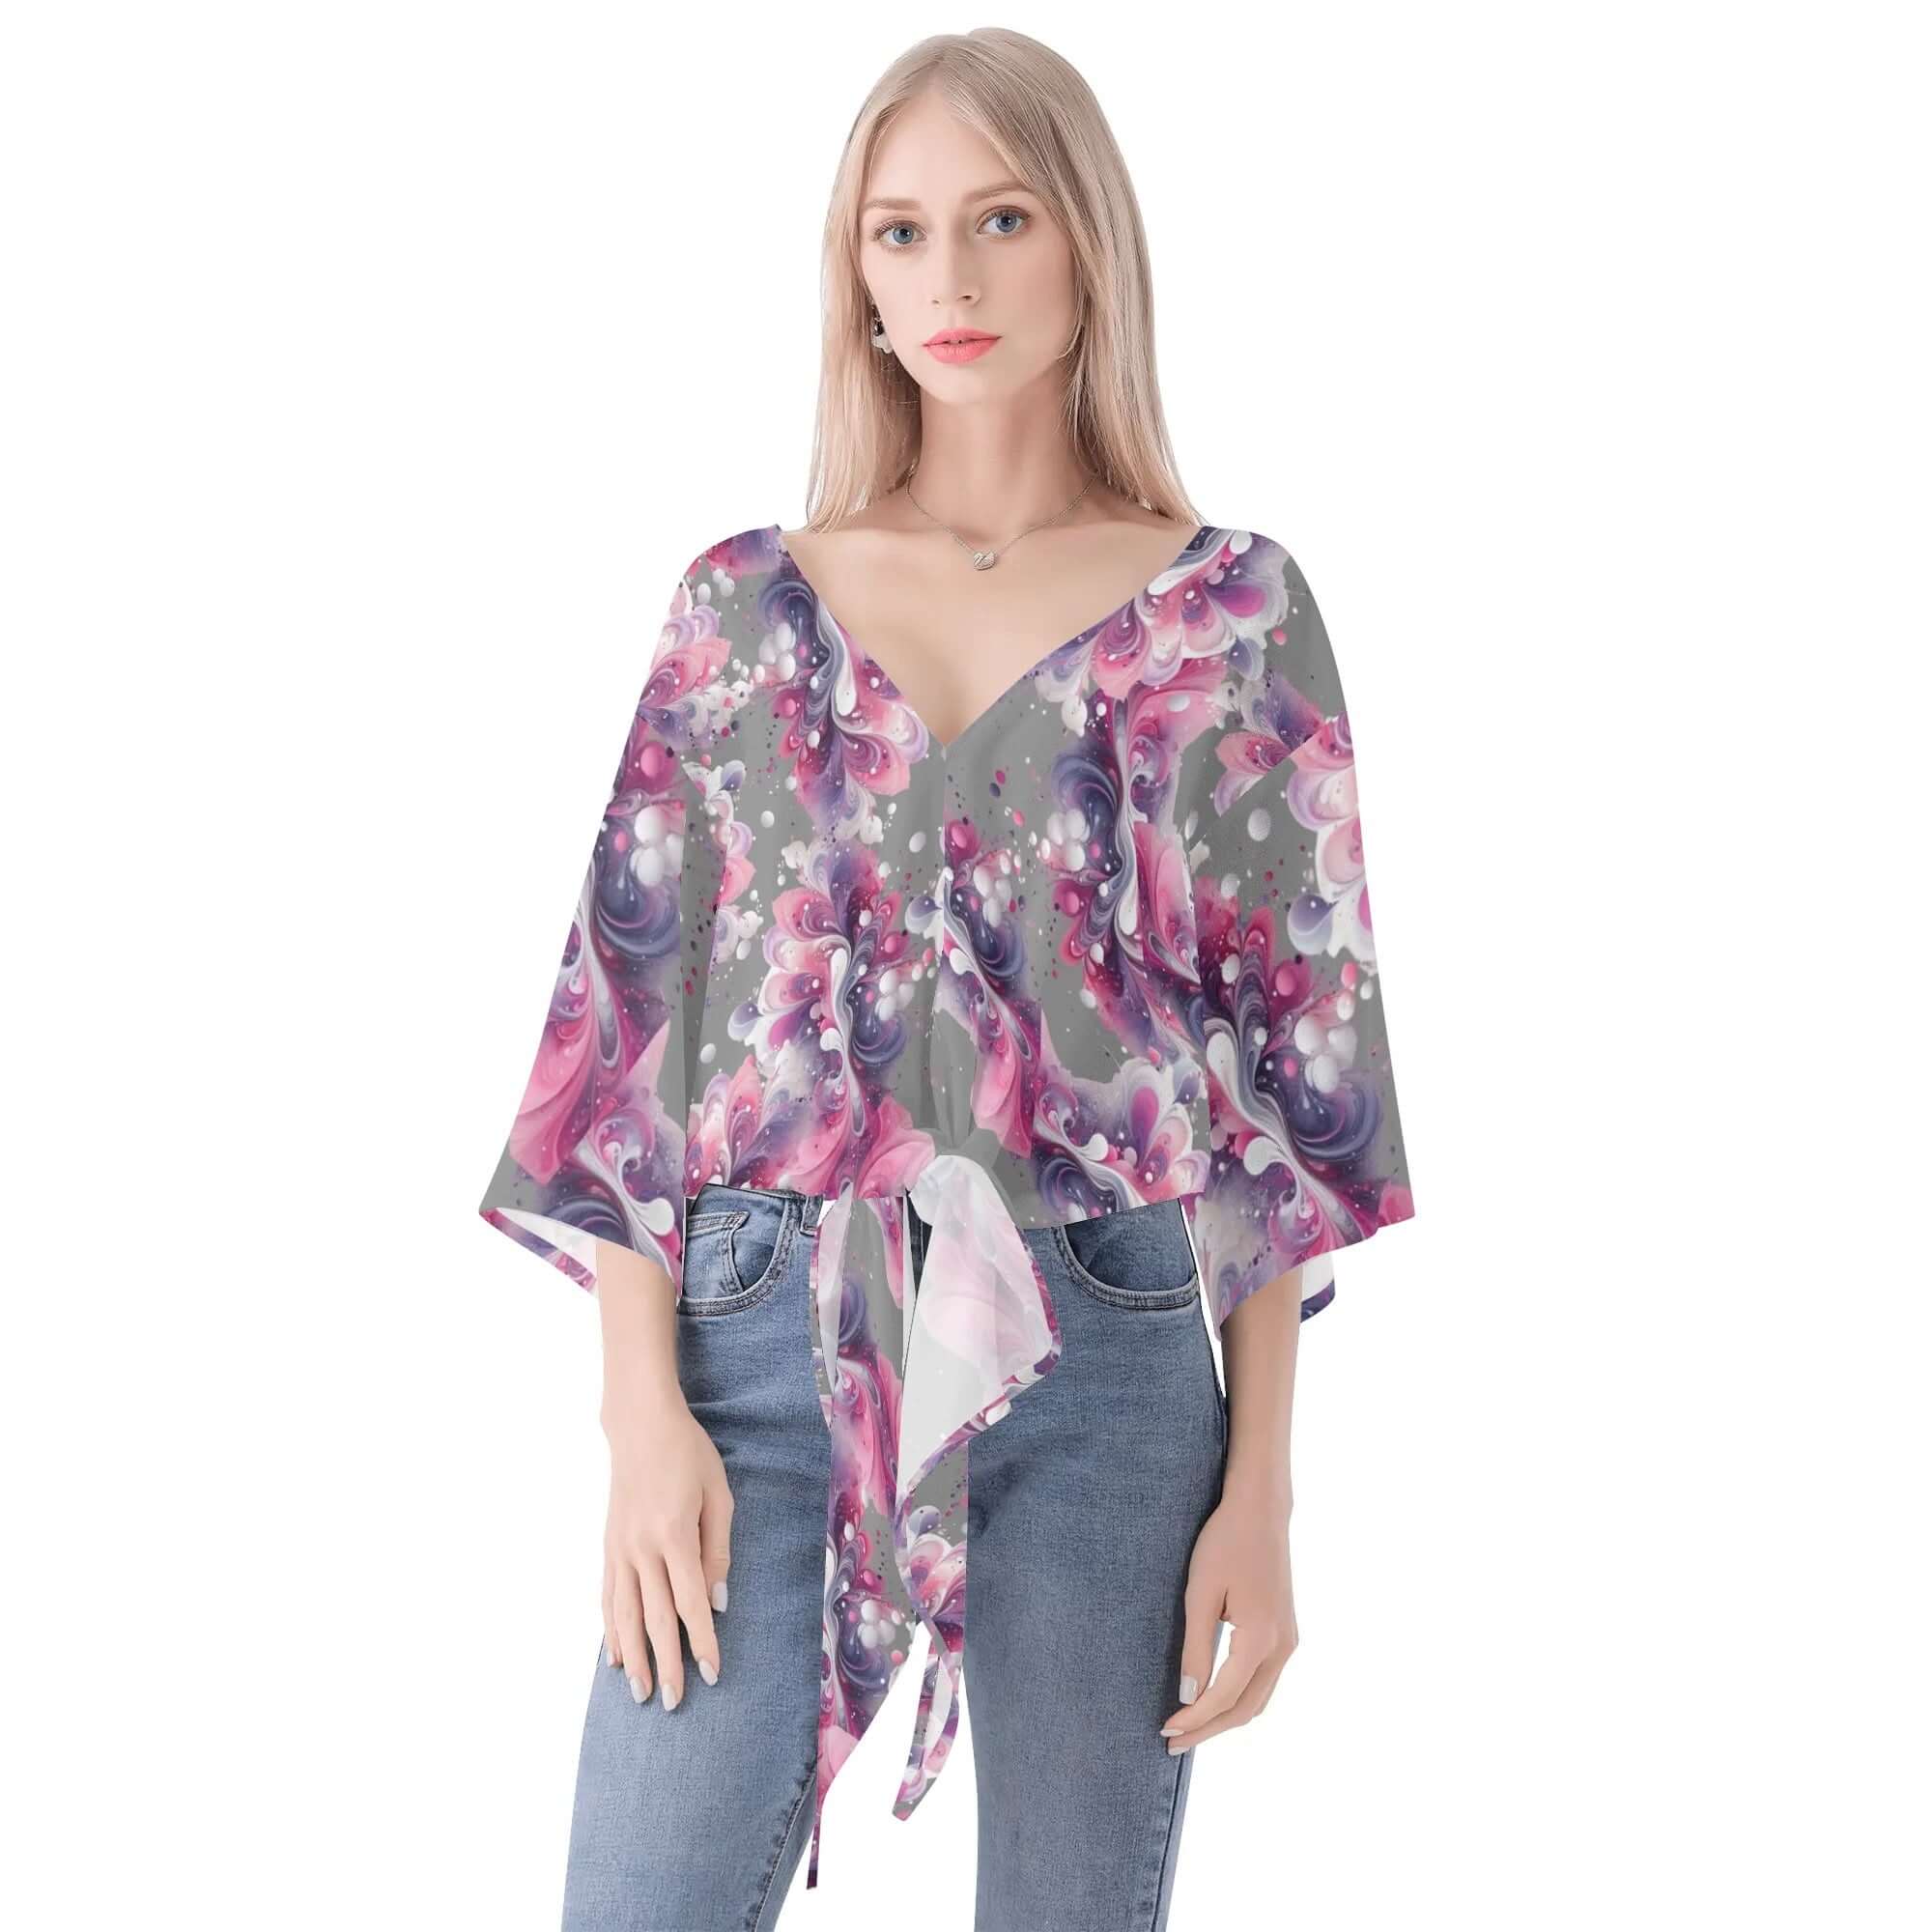 2 - Women‘s’ V-neck Tie Front Knot Chiffon Blouse - Splatter Women‘s’ V-neck Tie Front Knot Chiffon Blouse - womens blouse at TFC&H Co.